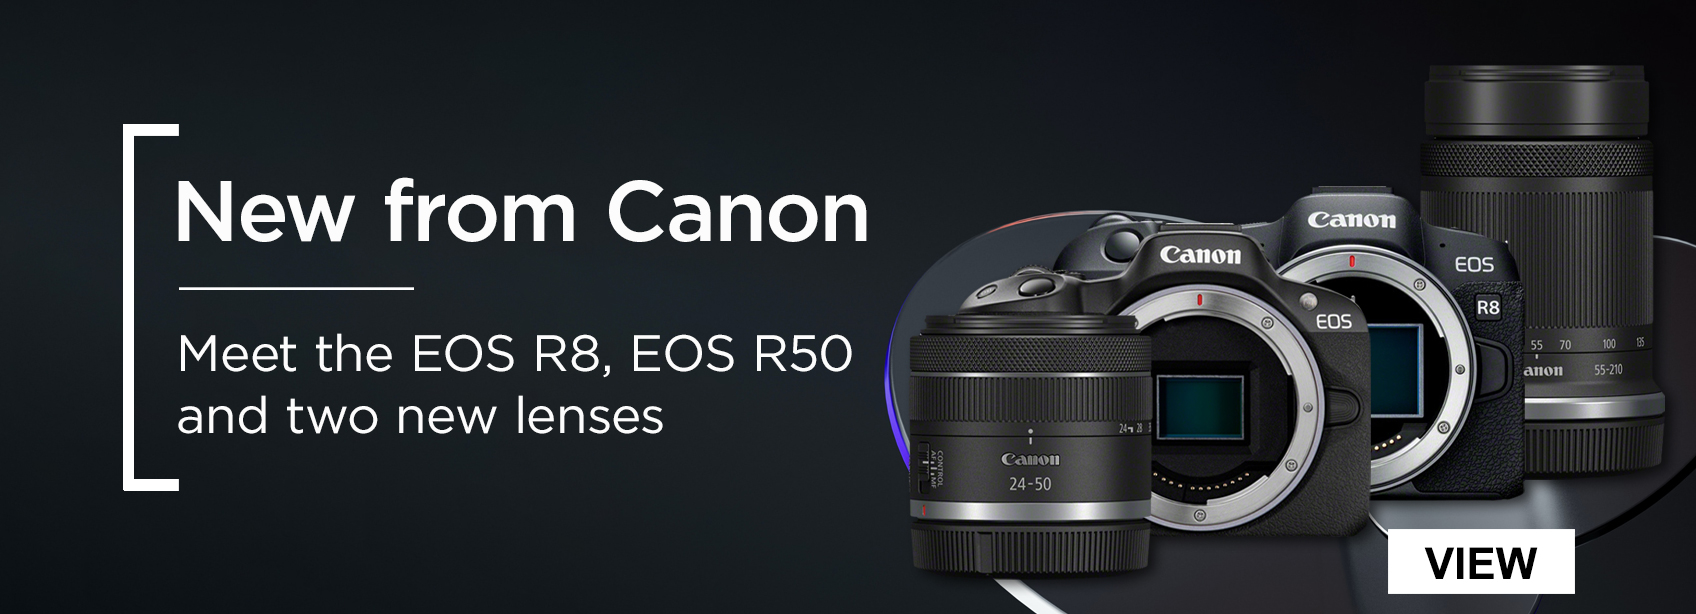 New from Canon. Meet the EOS R8, EOS R50 and two new lenses.